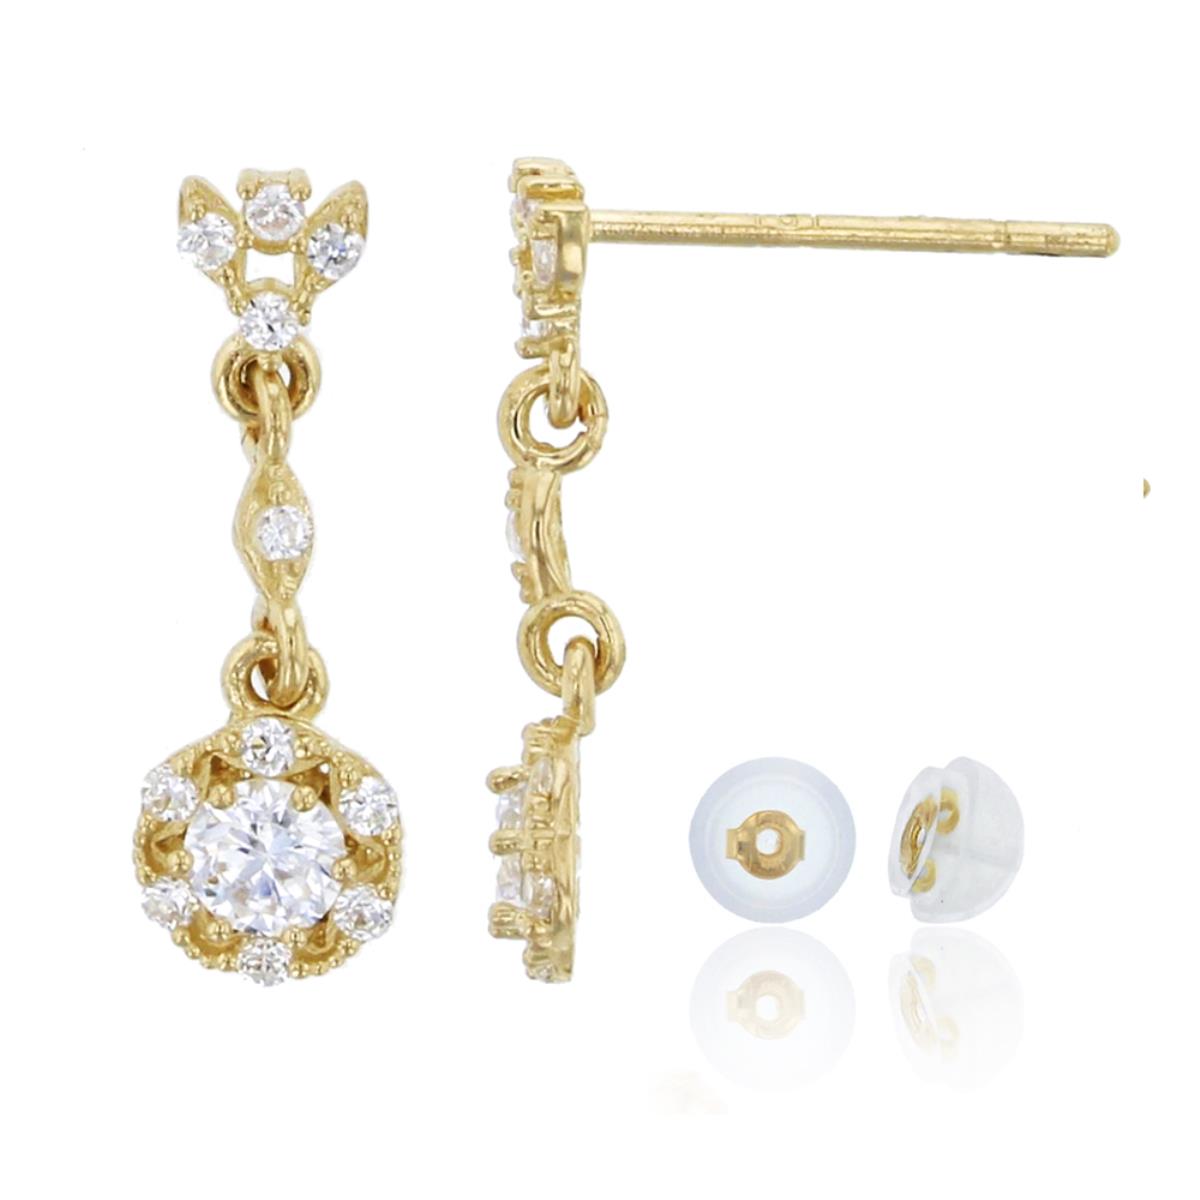 10K Yellow Gold Micropave Round Cut Floral Dangling Earring & 10K Silicone Back